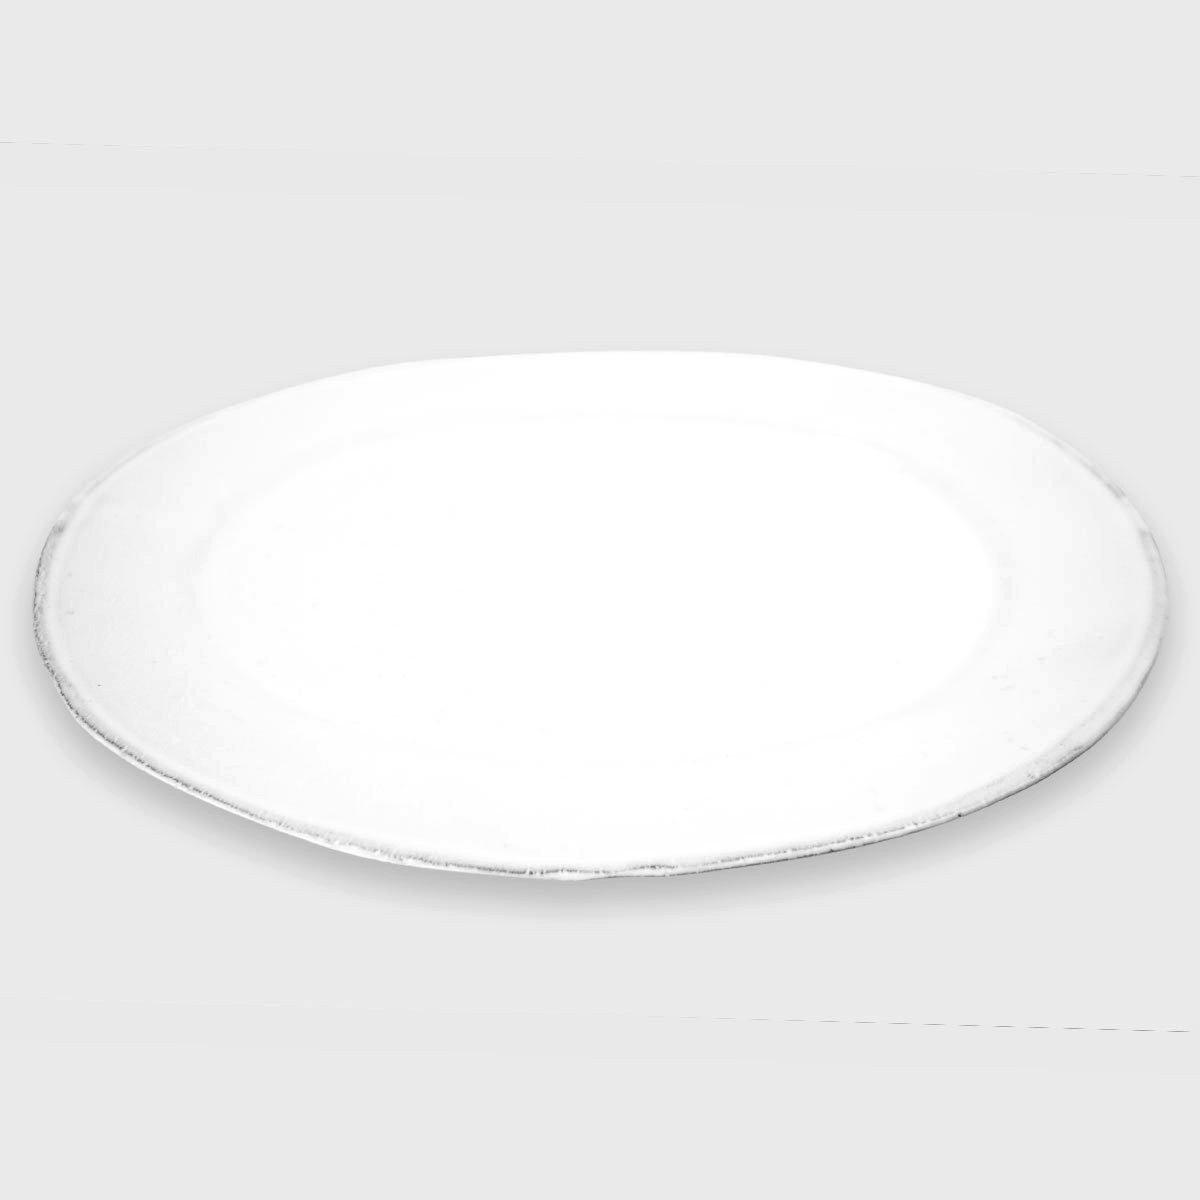 Paris oval platter-Handmade in France by CARRON